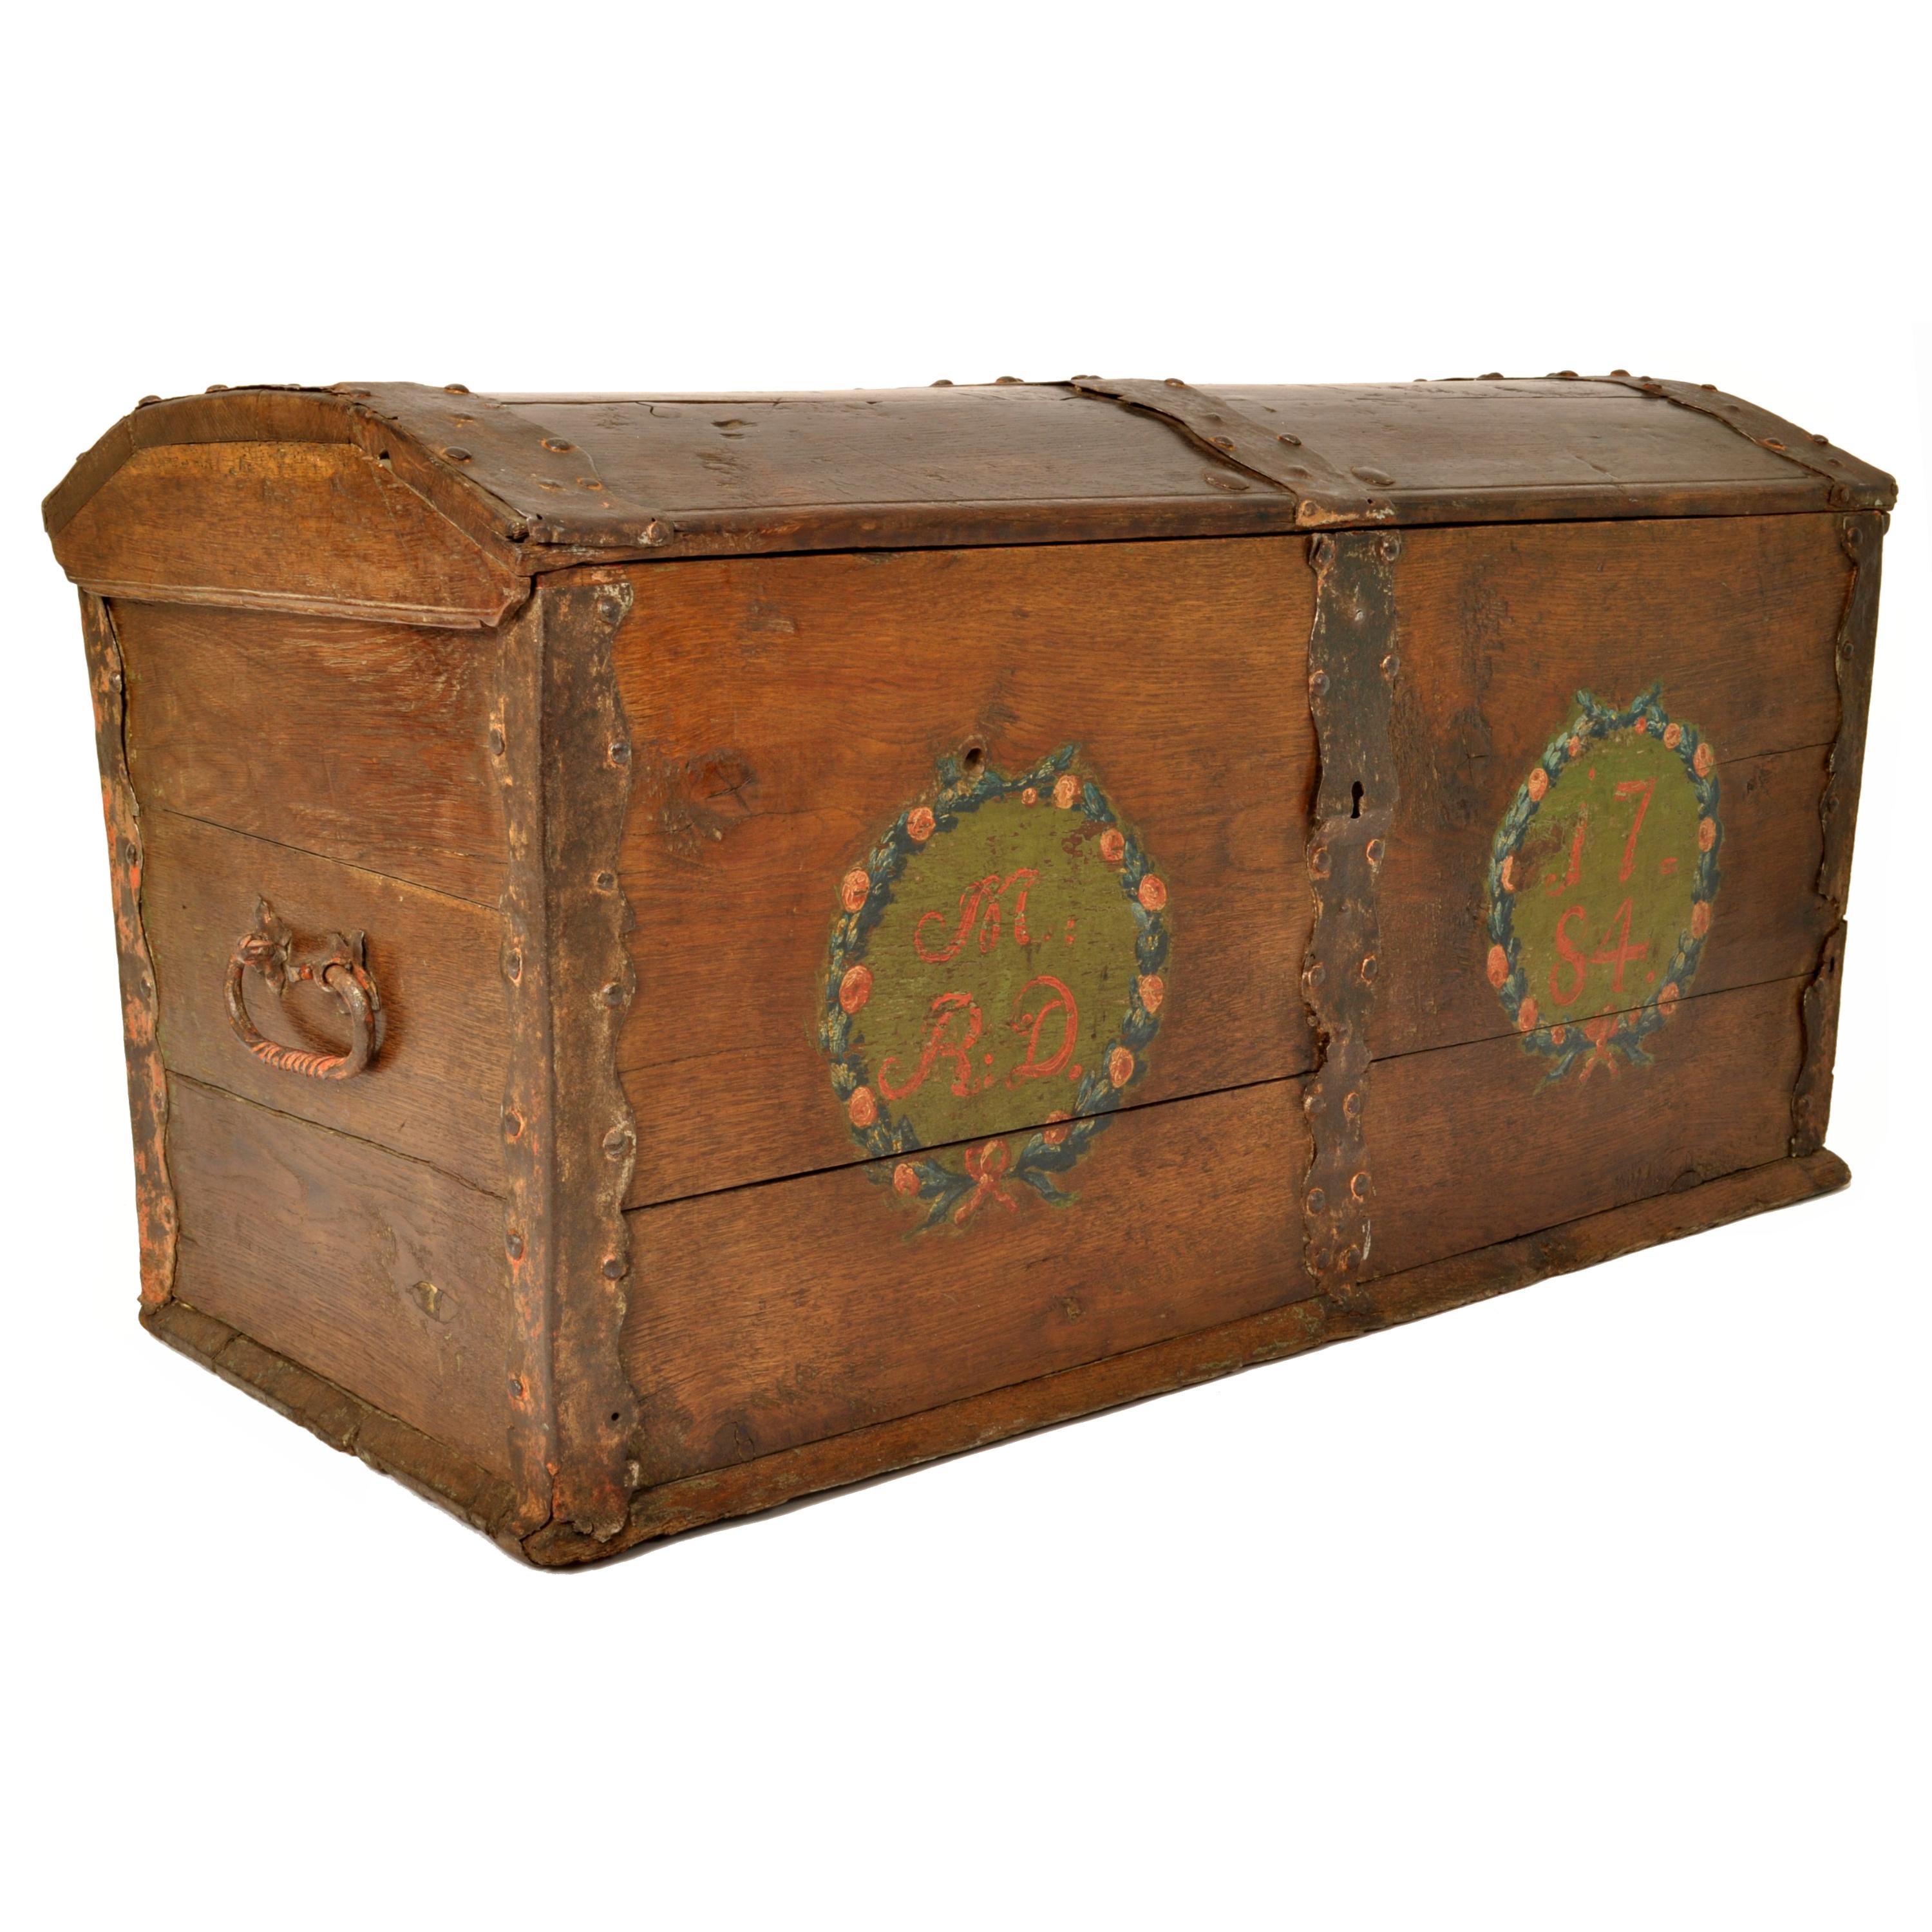 Antique German Baroque dome top painted walnut sea chest, dated 1784.
The chest having a hinged dome top with iron strapping, the interior of the lid having hand-forged strap hinges and original hand-forged iron lock and key, the interior of the